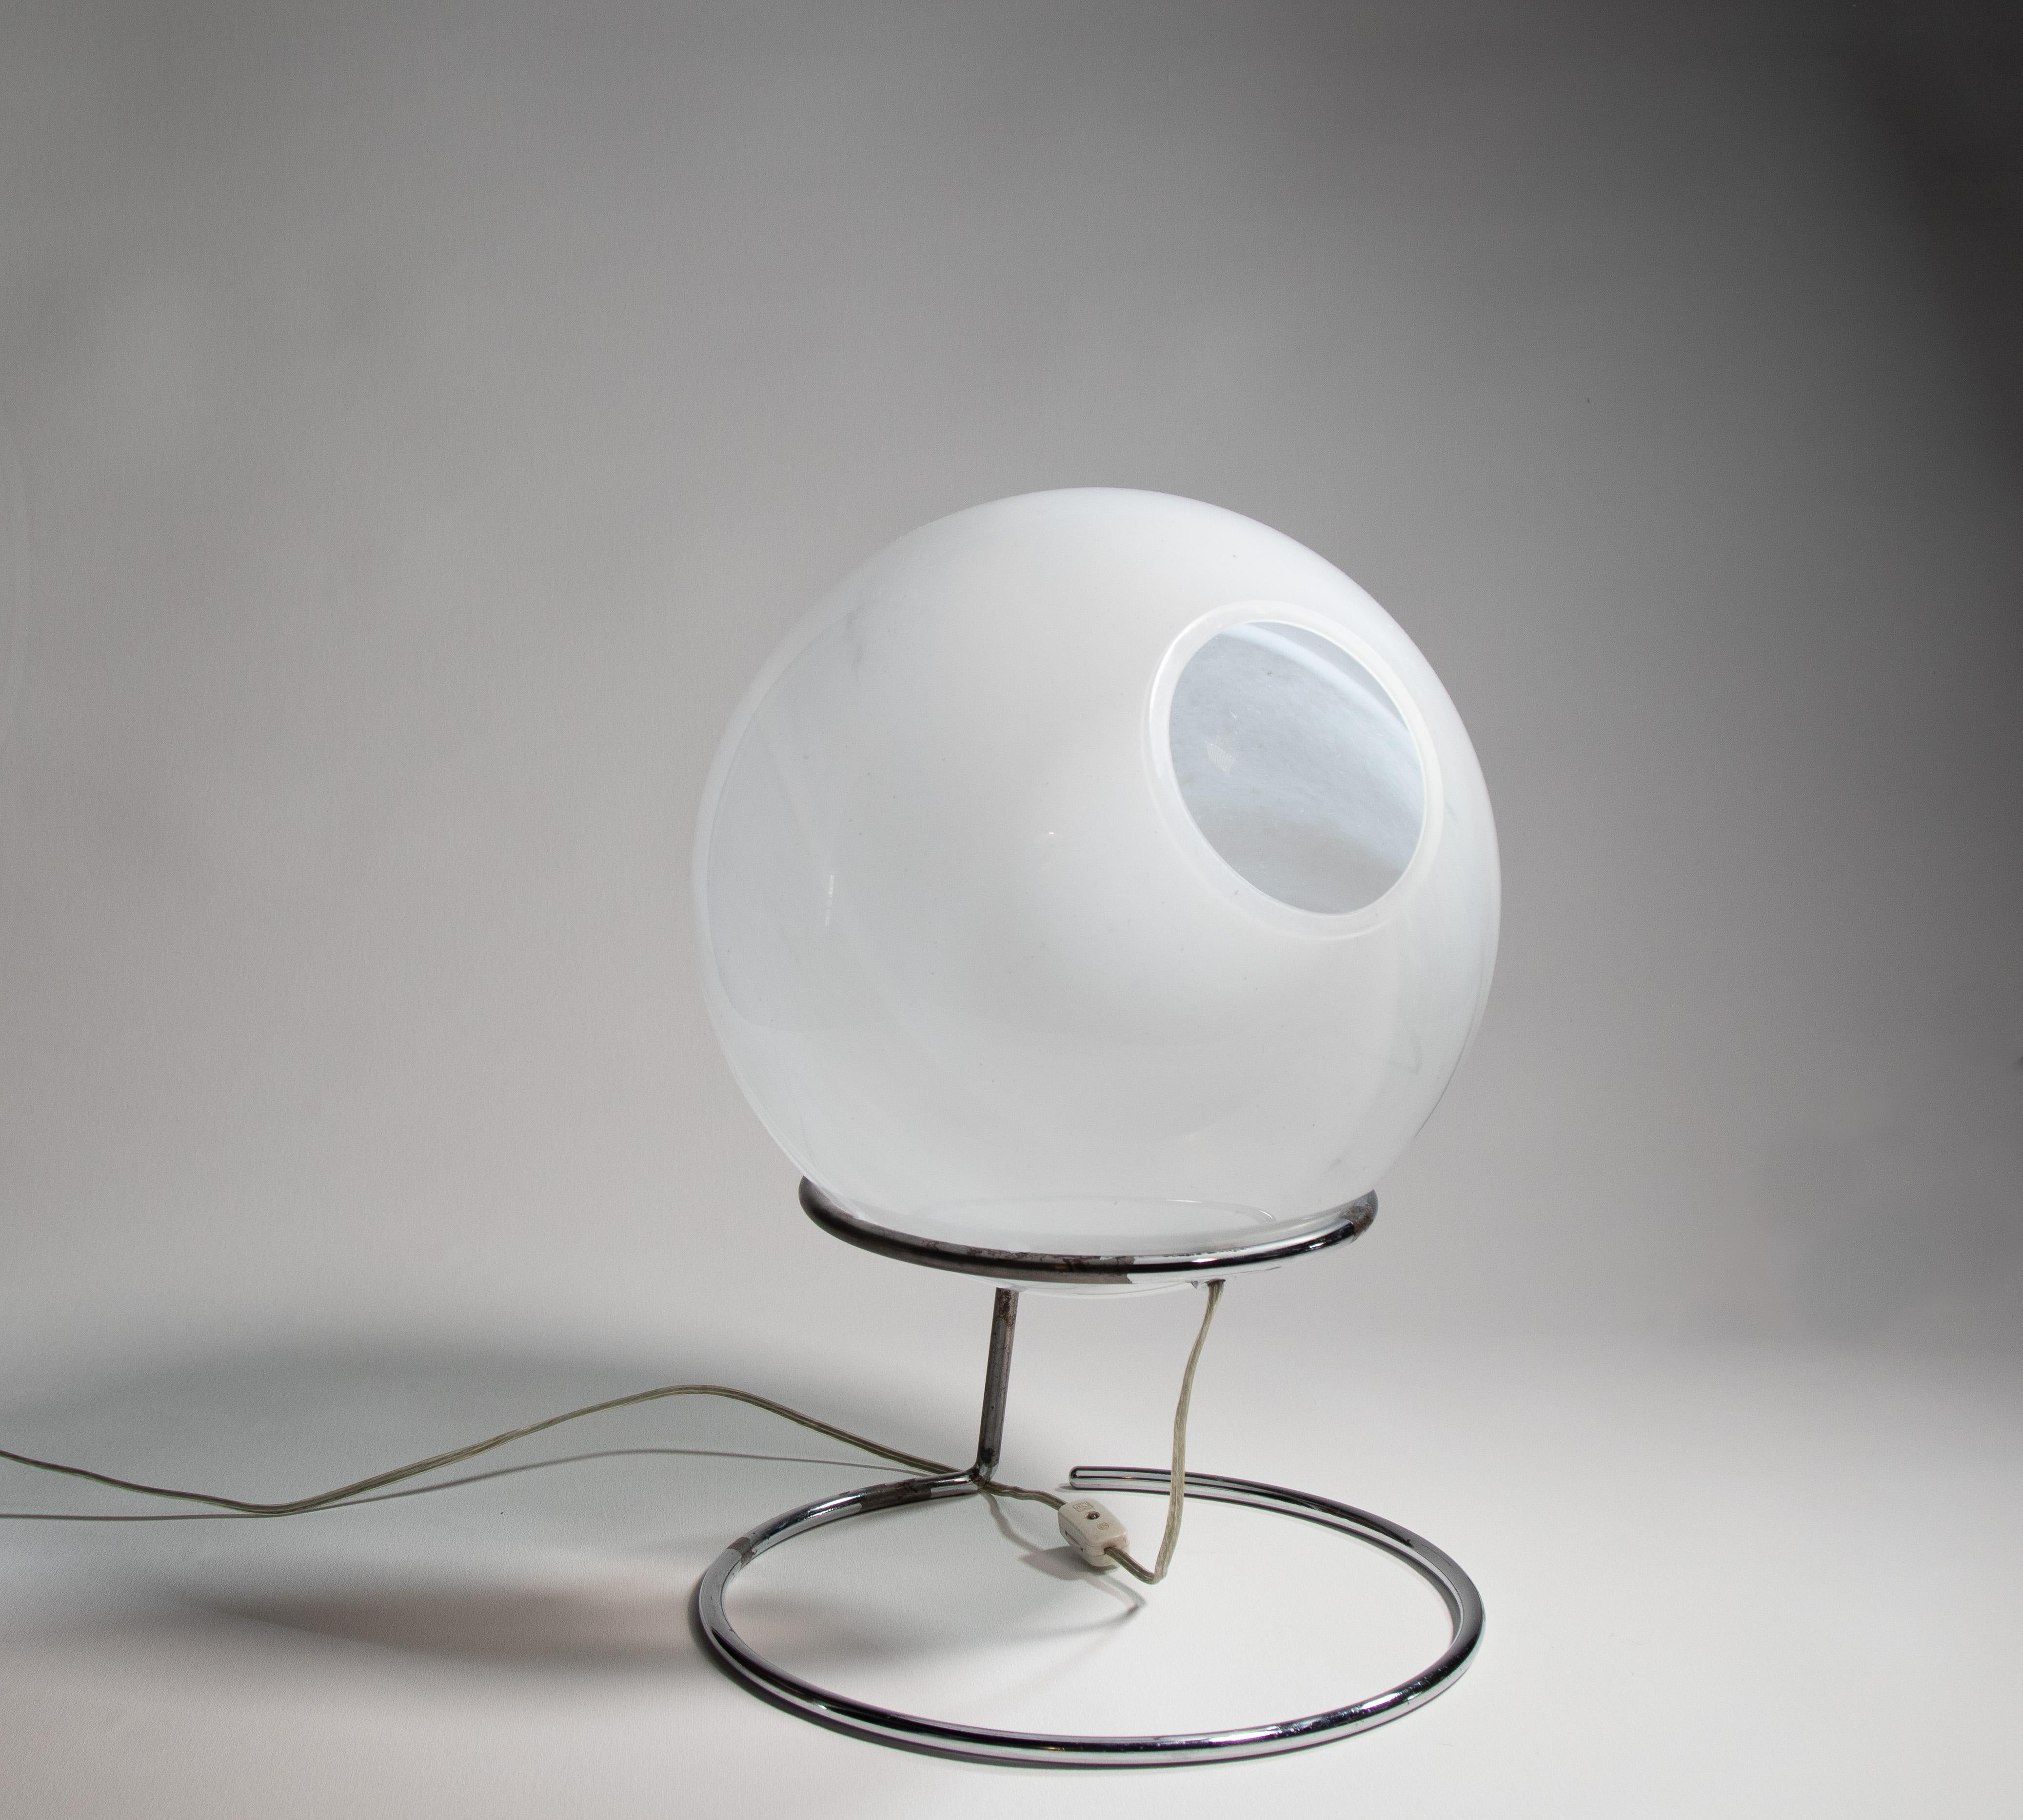 A unique lamp featuring white swirled art glass cantilevered over a chrome floating stand. The eye can be adjusted to focus light on an object while allowing a warm overall glow. The glass orb rests freely in the chrome stand. 

Dimensions:

12”